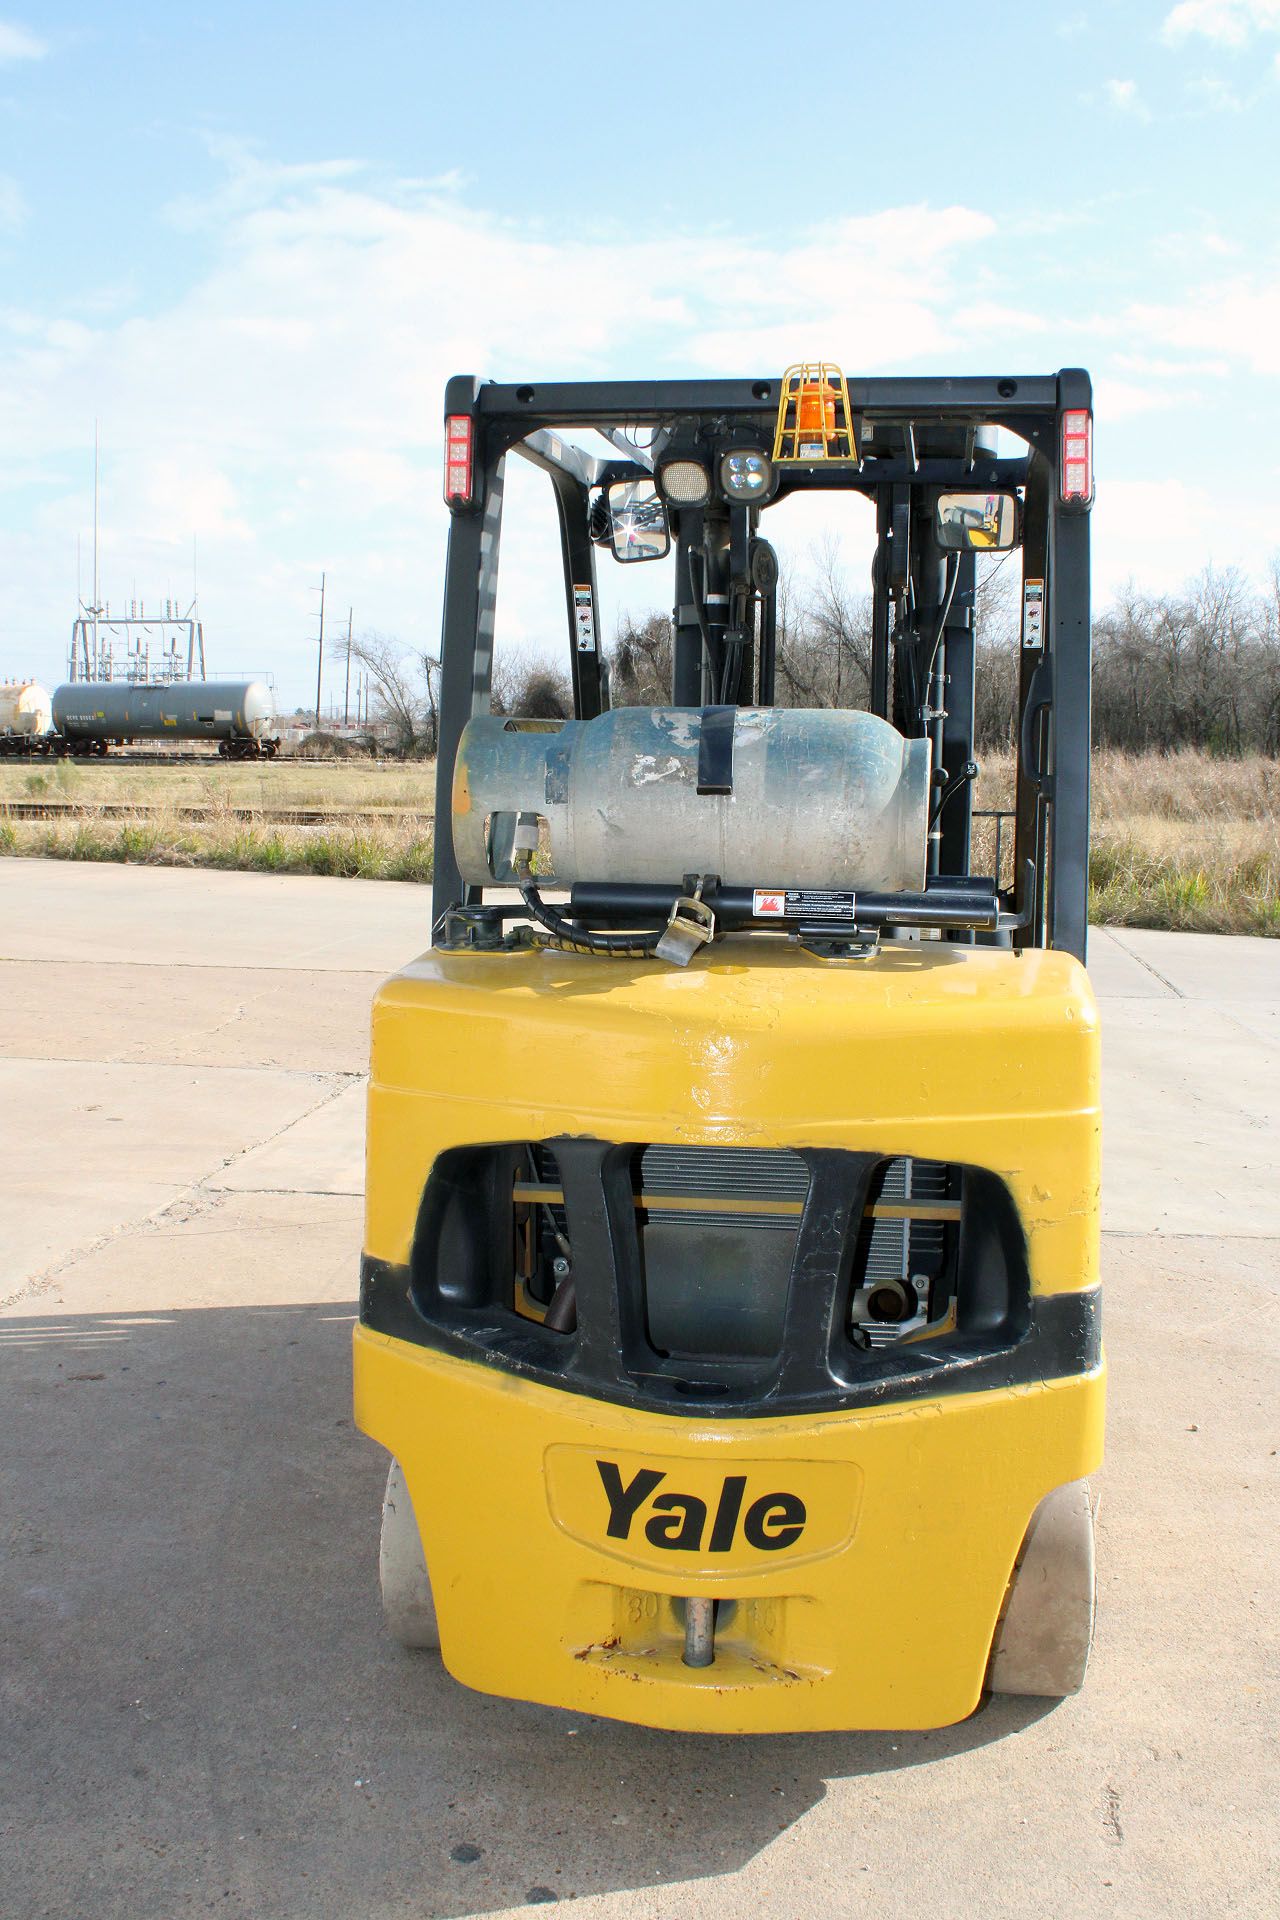 FORKLIFT, YALE 8,000 LB. BASE CAP. MDL. GLC080, new 2016, LPG, 200" max. lift ht., 94" 3-stage mast, - Image 4 of 11